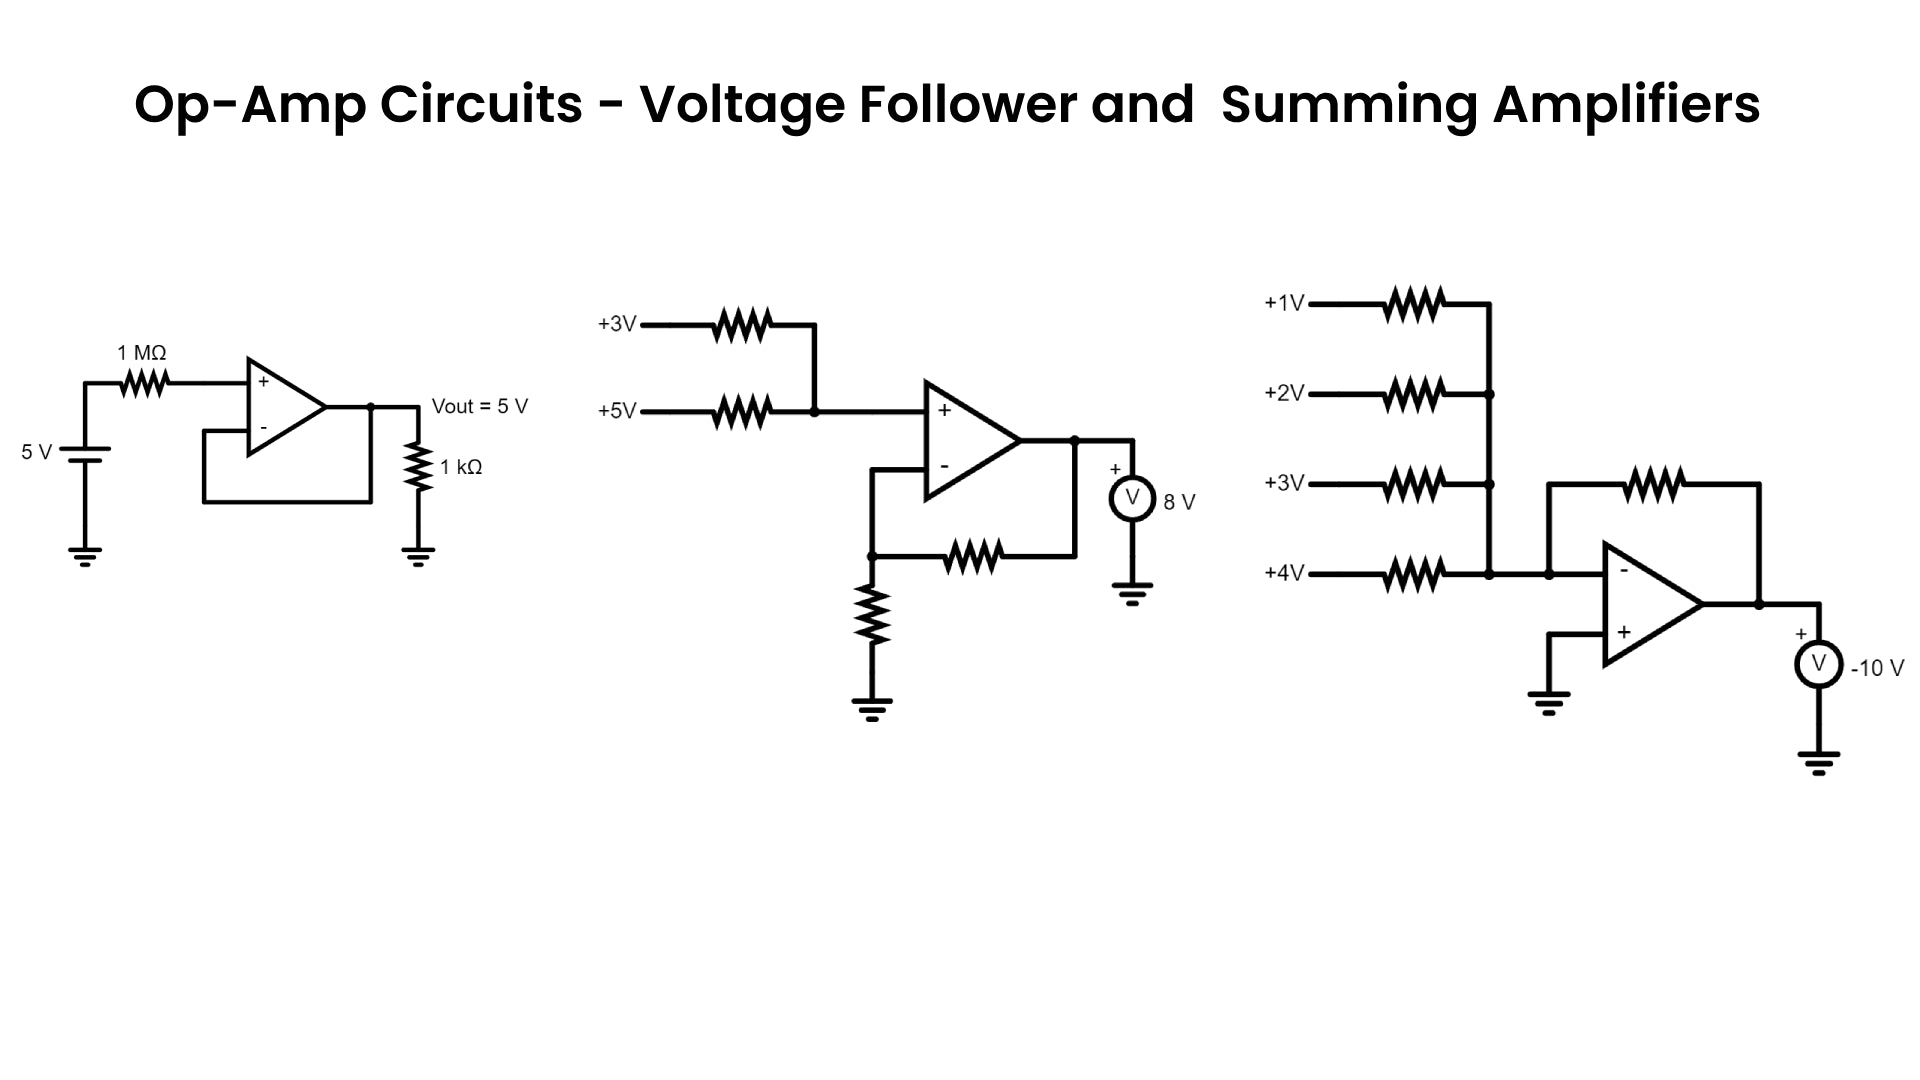 Op-Amp Circuits - Voltage Follower and Summing Amplifiers